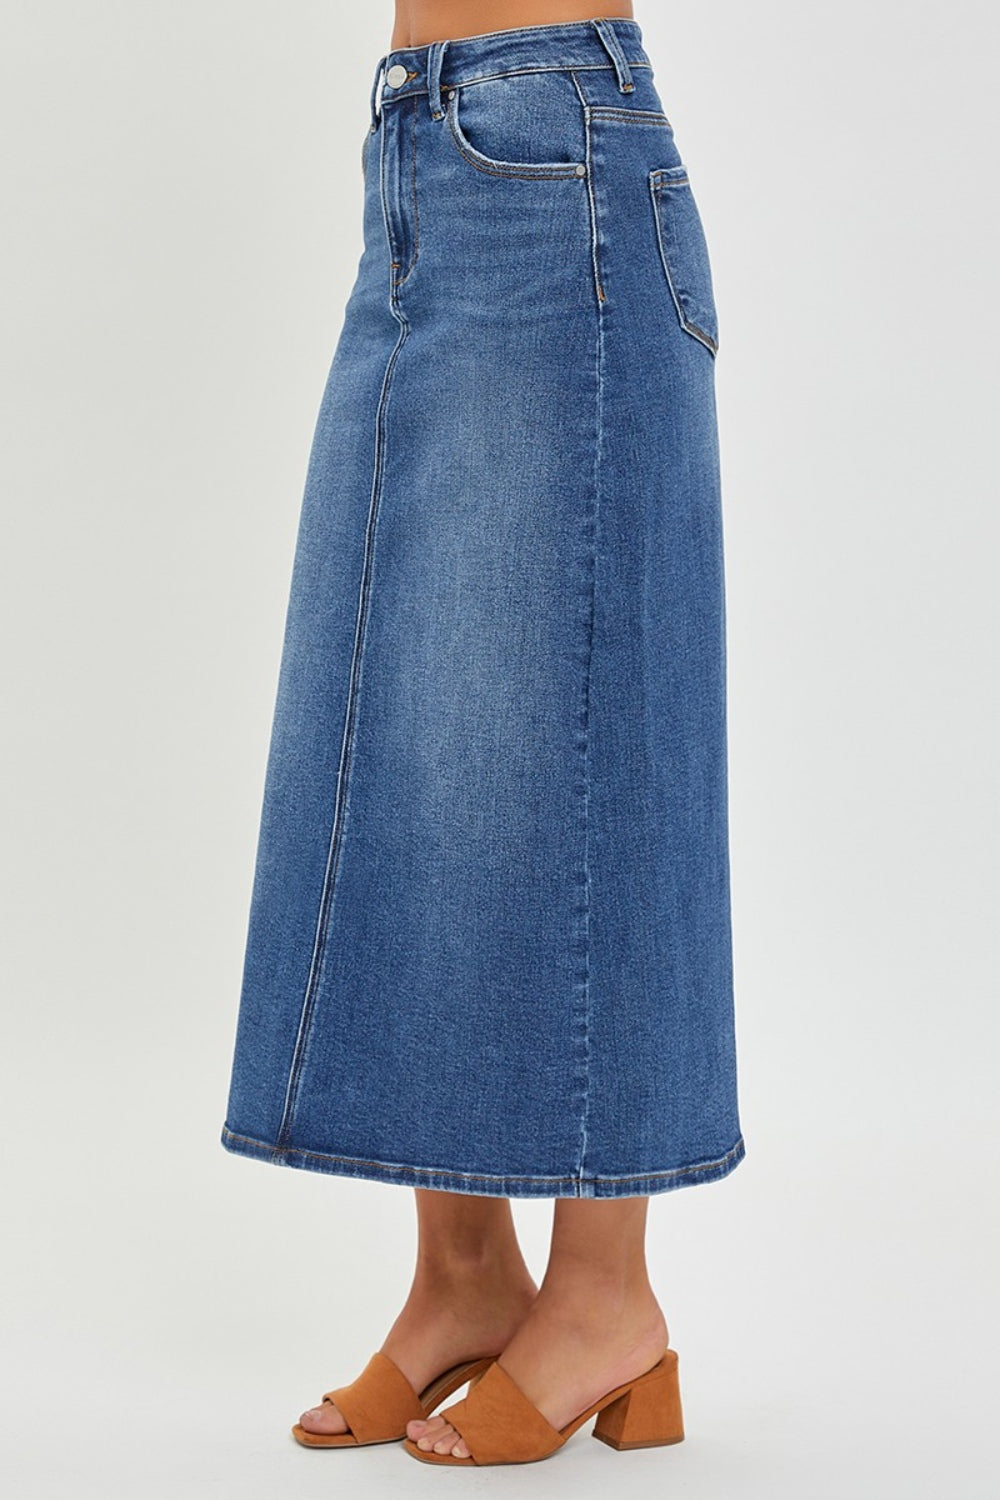 The High Rise Back Slit Denim Skirt is a stylish and versatile addition to your wardrobe. Made from high-quality denim, this skirt features a high-rise waist and a trendy back slit detail. Pair it with a tucked-in blouse and heels for a chic look, or dress it down with a graphic tee and sneakers for a more casual vibe. S  - XL